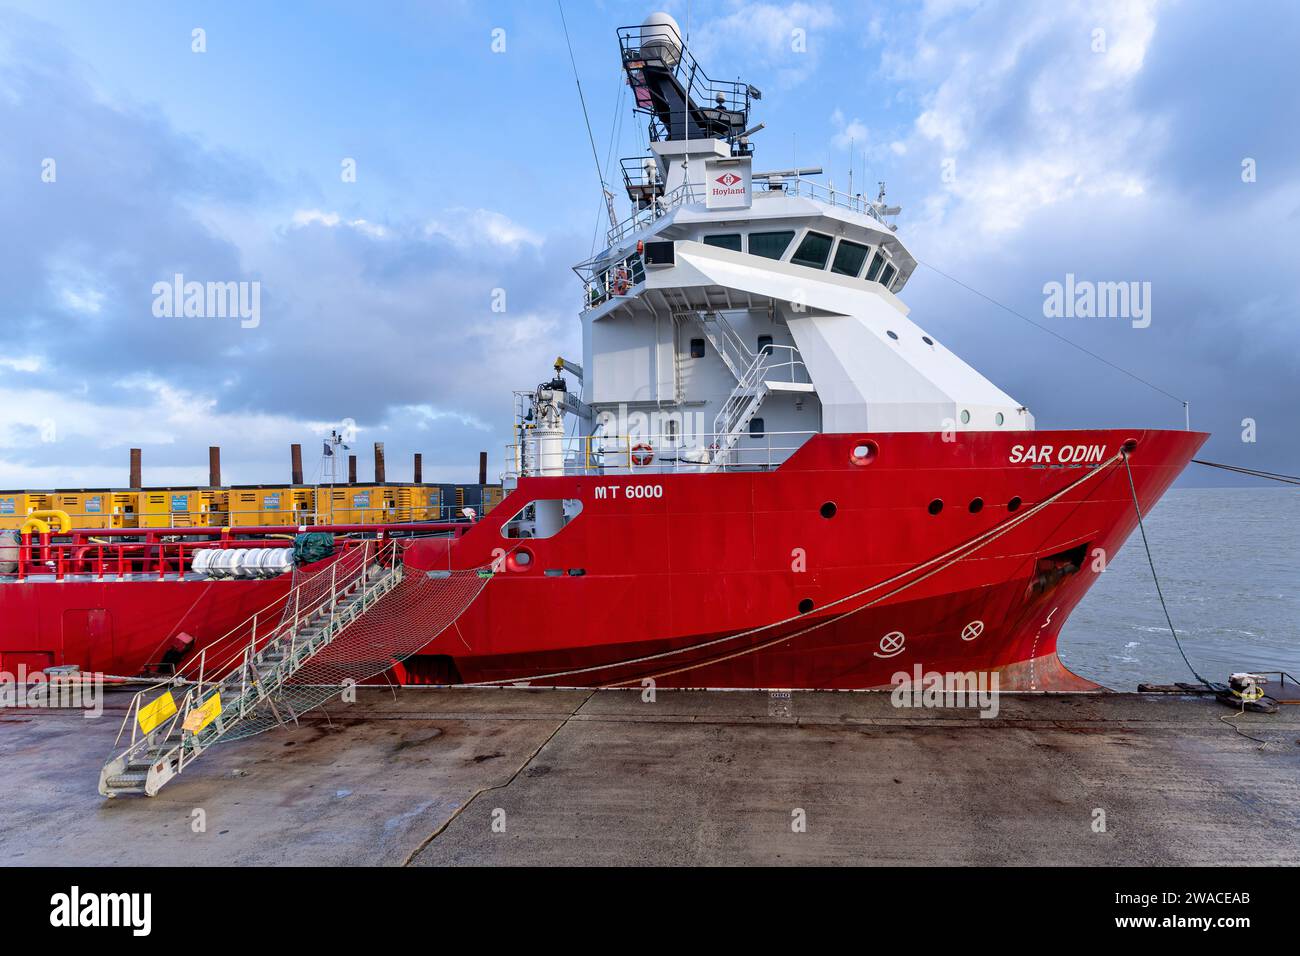 Hoyland Offshore platform supply vessel Sar Odin in the port of Cuxhaven, Germany Stock Photo